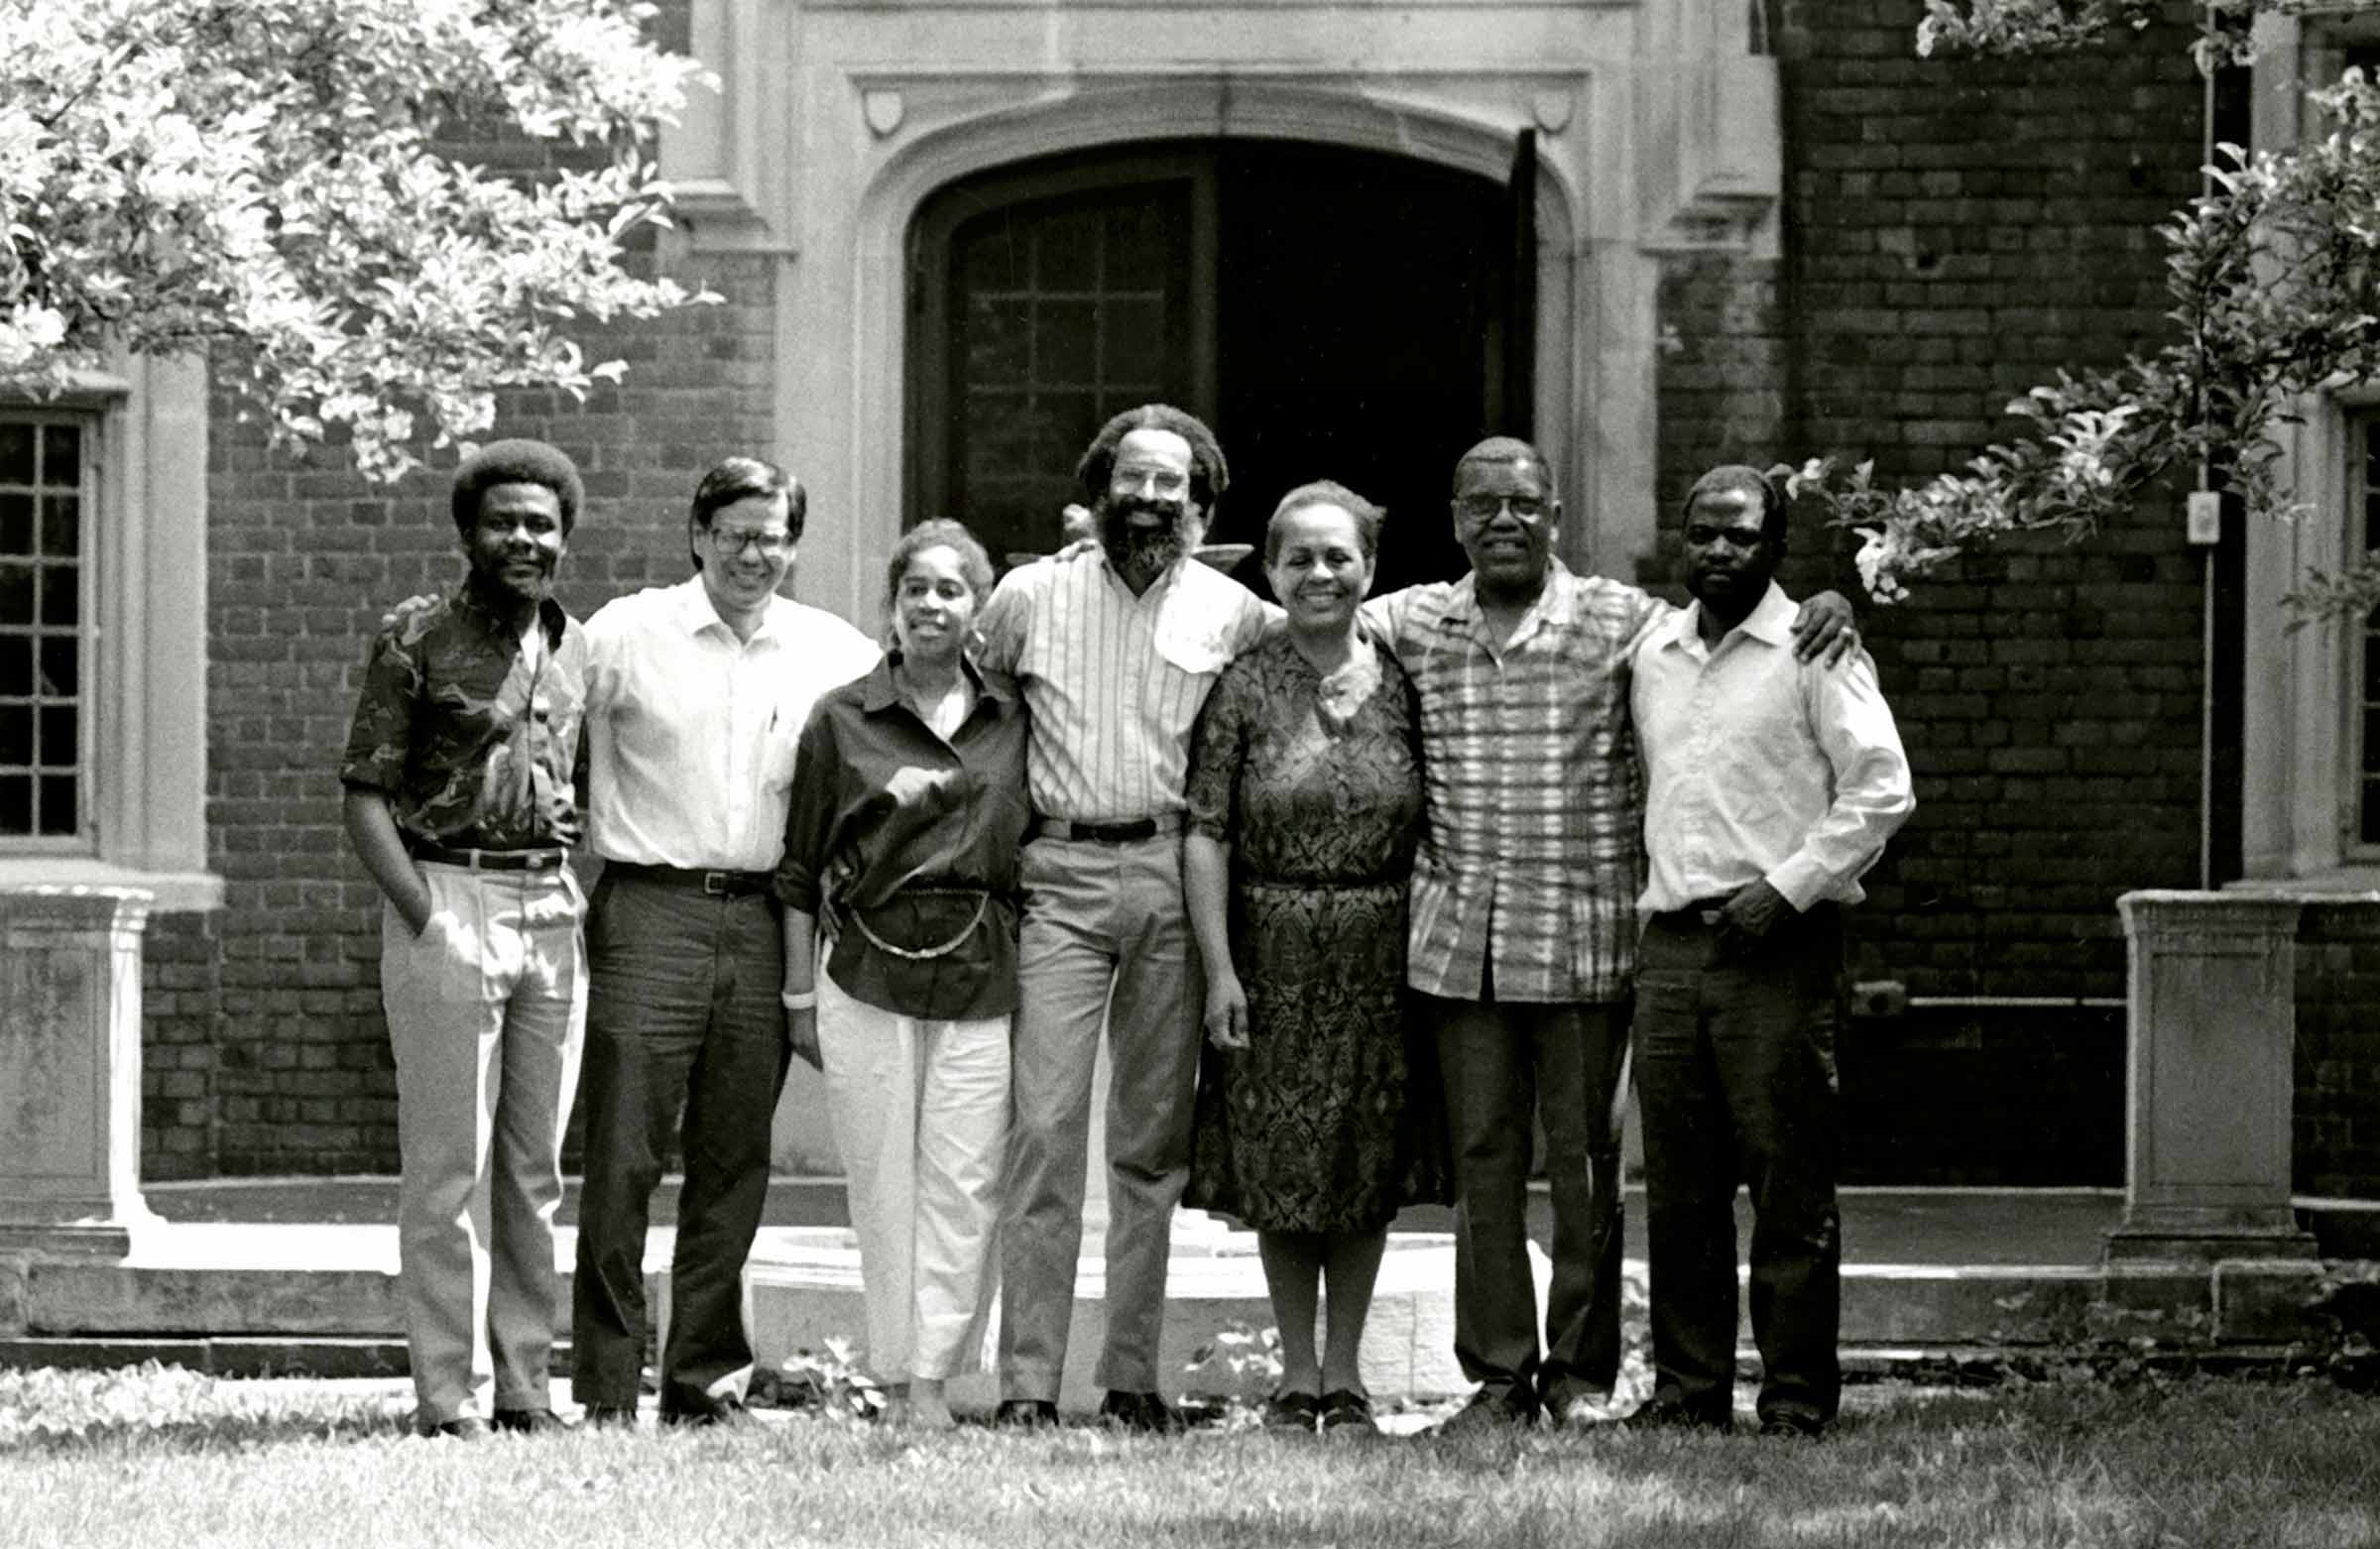 Prof. Mamiya (2nd from left) at a retreat with fellow members of the Africana Studies program in 1989. Pictured left to right: Tukumbi Lumumba Kasongo, Lawrence Mamiya, Joyce Bickerstaff, Obika Gray, Constance Berkley, Norman Hodges, and Gesler Moses Nkondo.